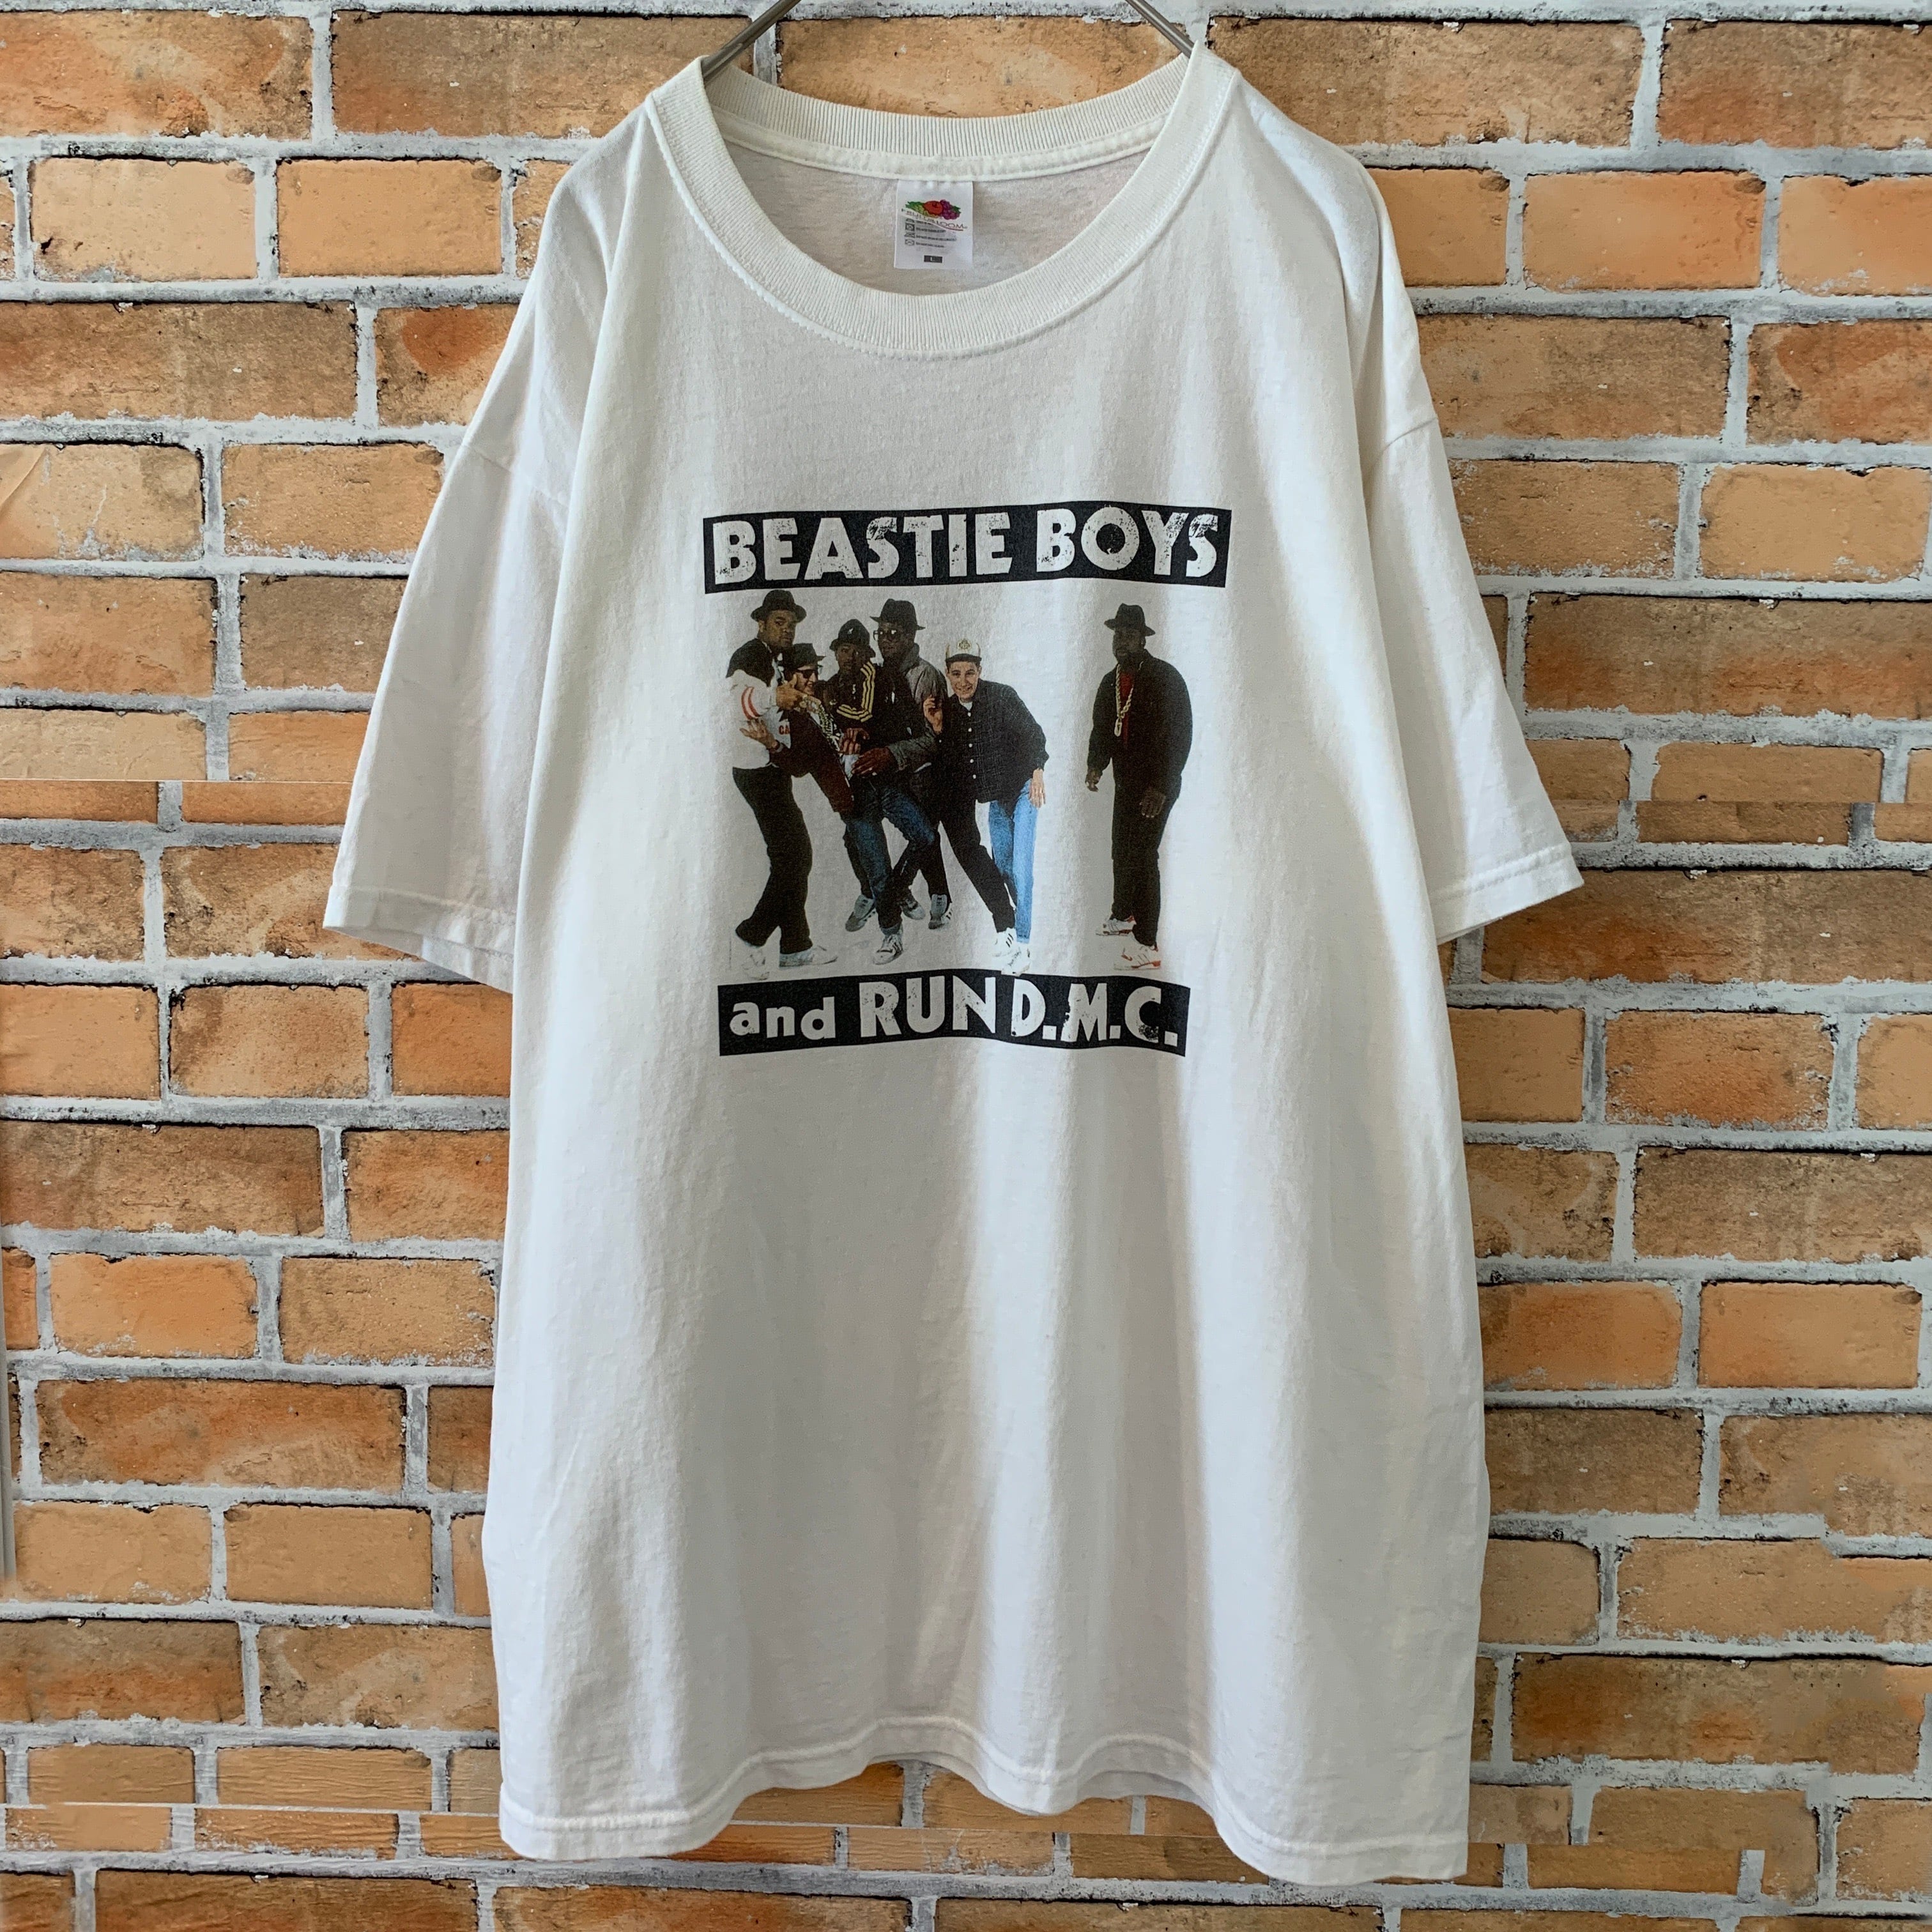 【FRUIT OF THE LOOM】Beastie Boys and RUN D.M.C. Tシャツ Large | 古着屋手ぶらがbest  powered by BASE